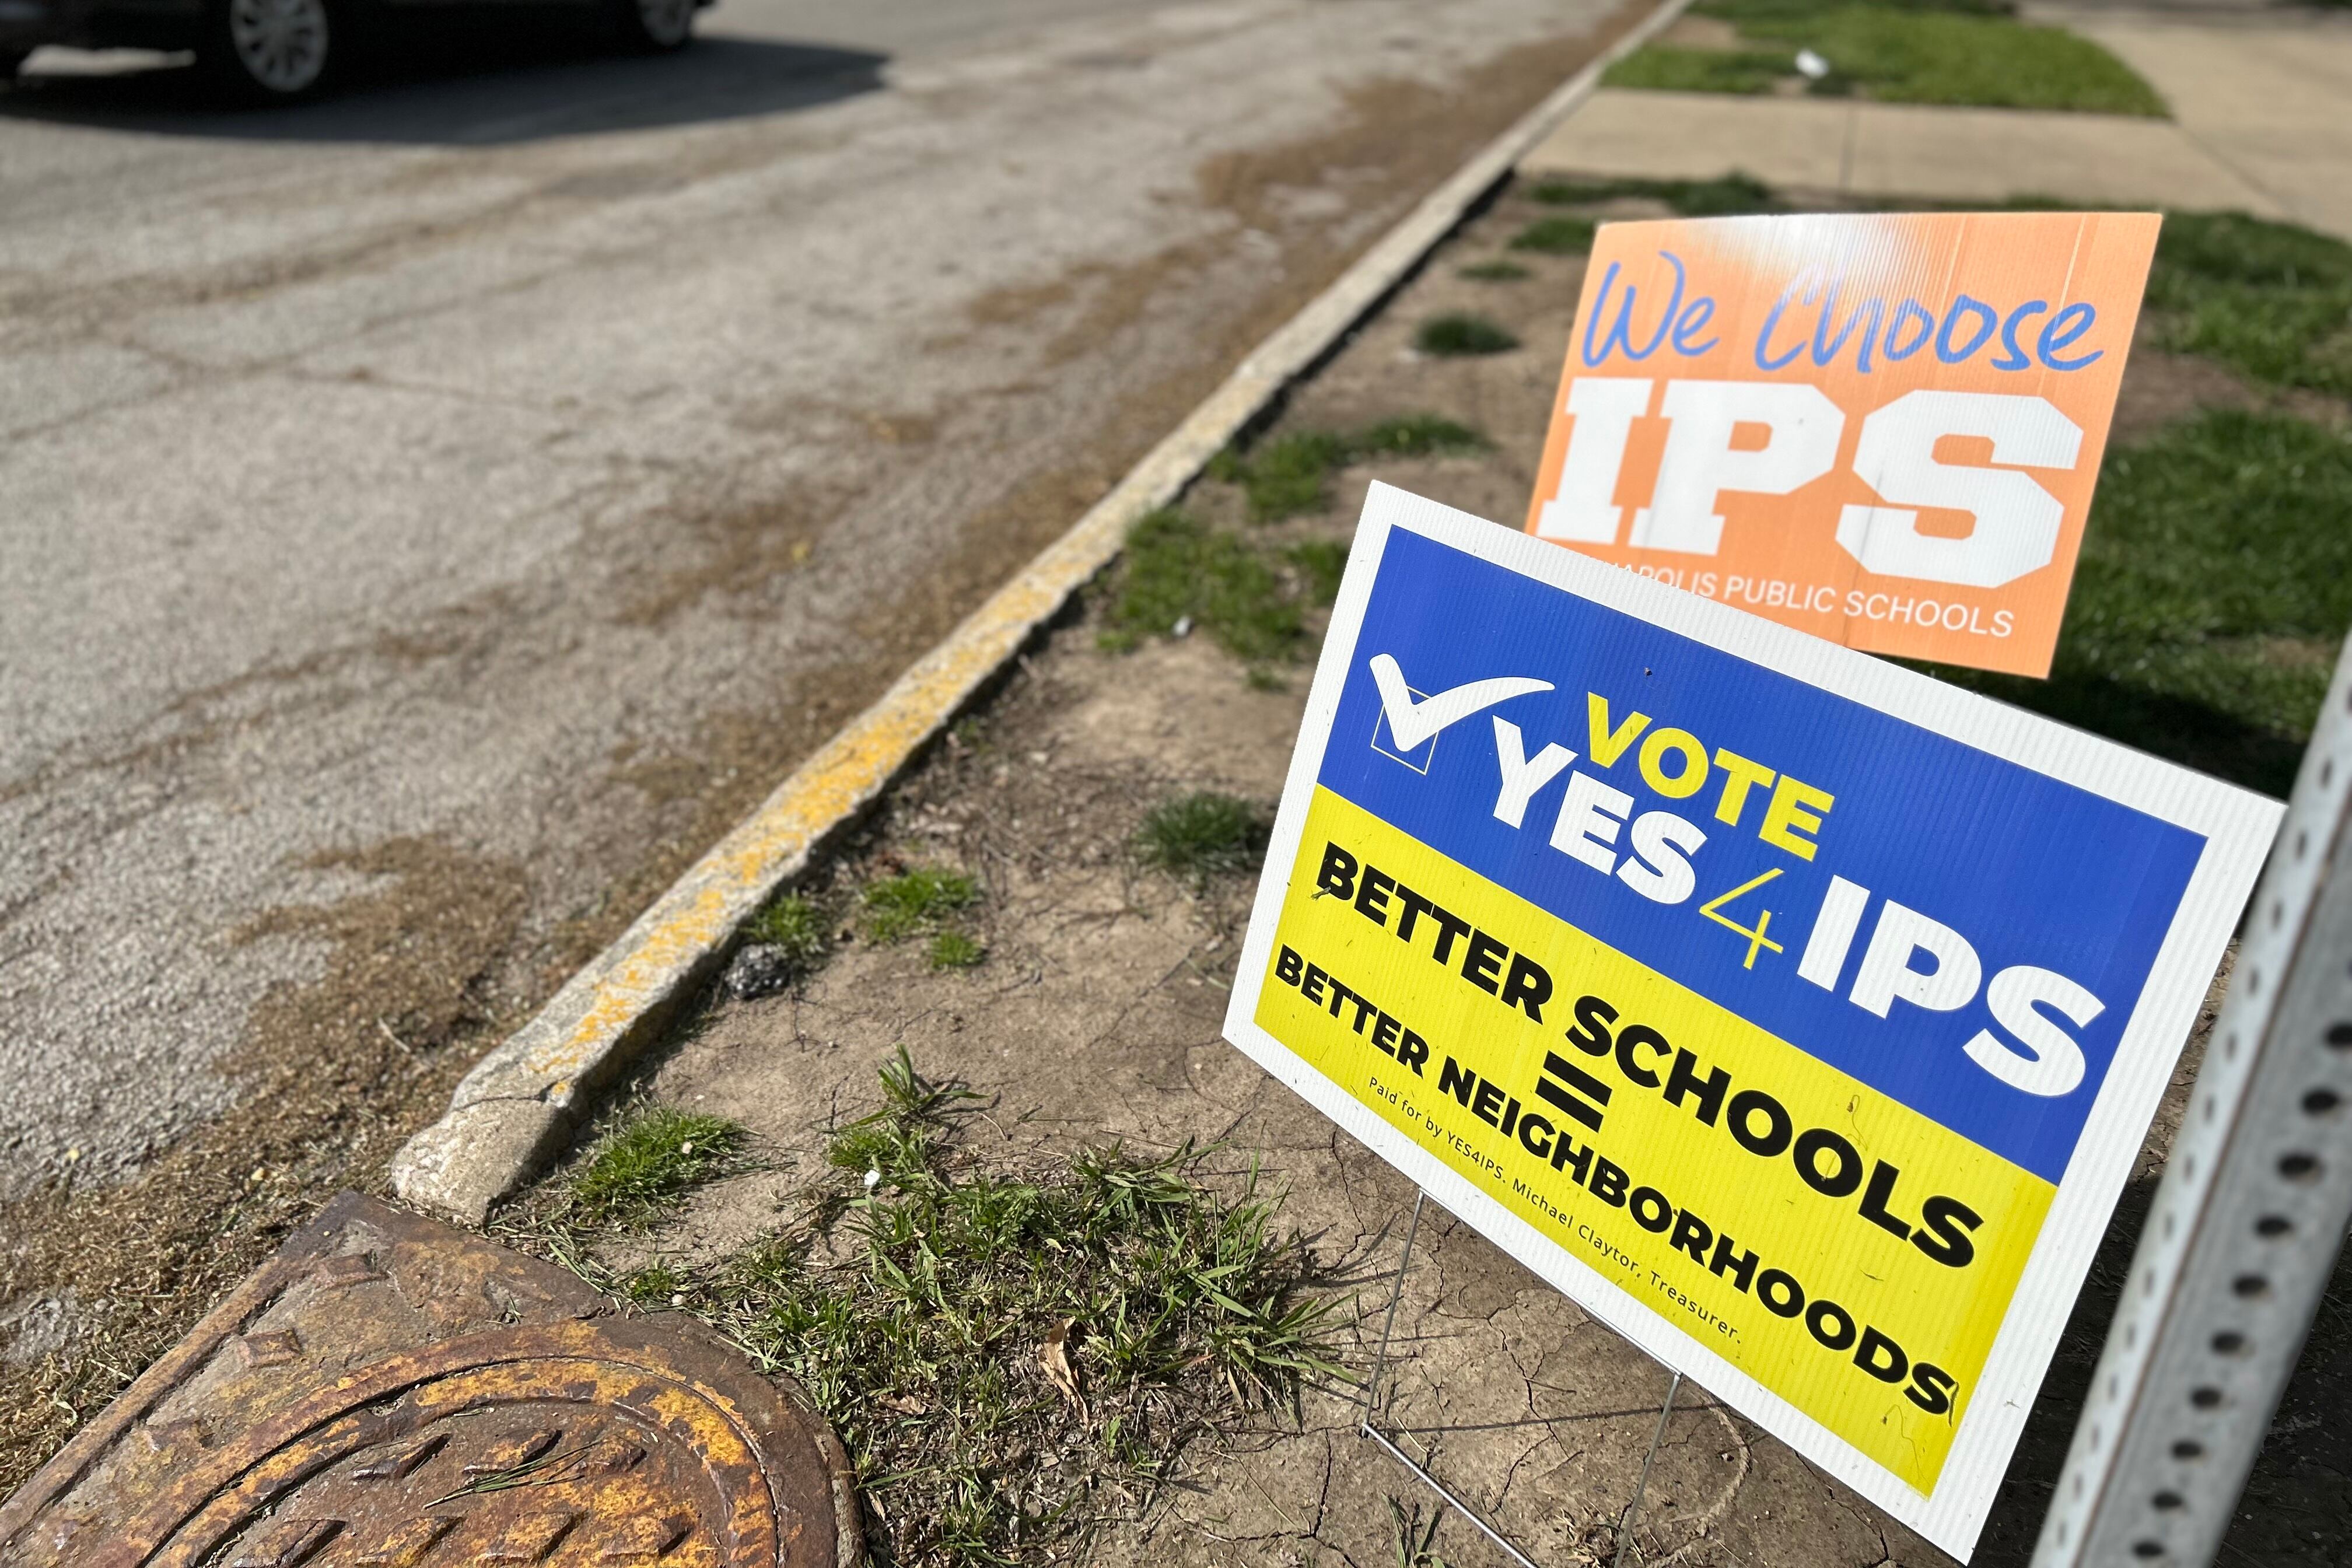 Two signs are in the ground next to teh street. One says “We choose IPS” and the other says “Vote yes for IPS. Better schools equal better neighborhoods.”